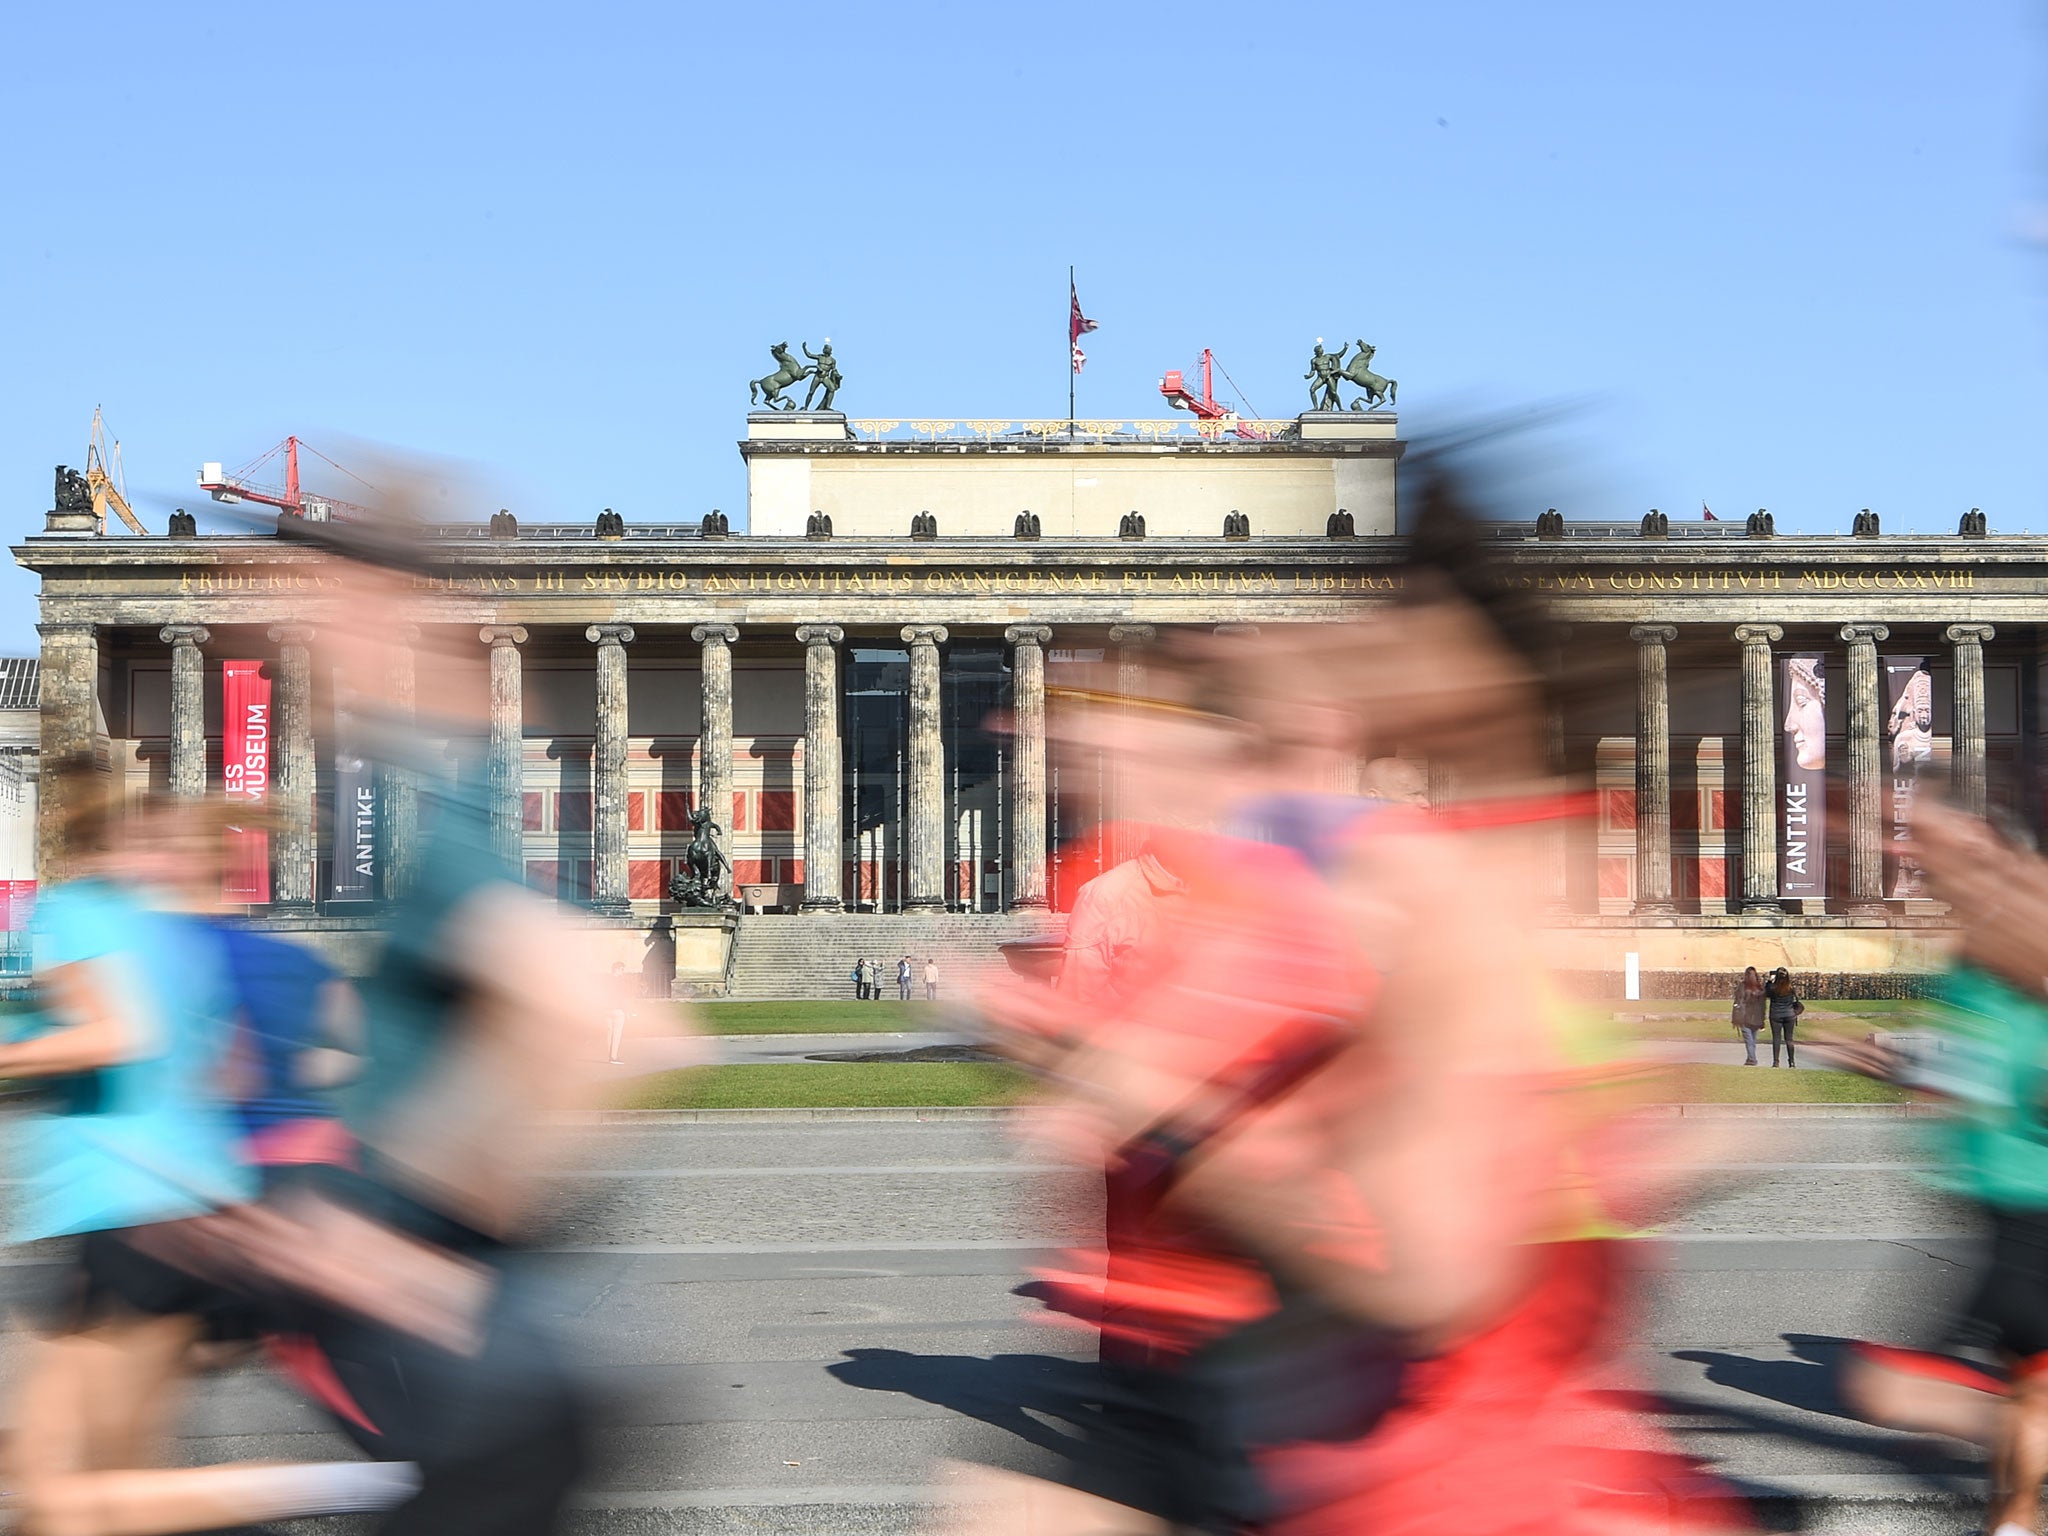 Suspects allegedly planned to carry out knife attack on spectators and runners at Berlin's half marathon